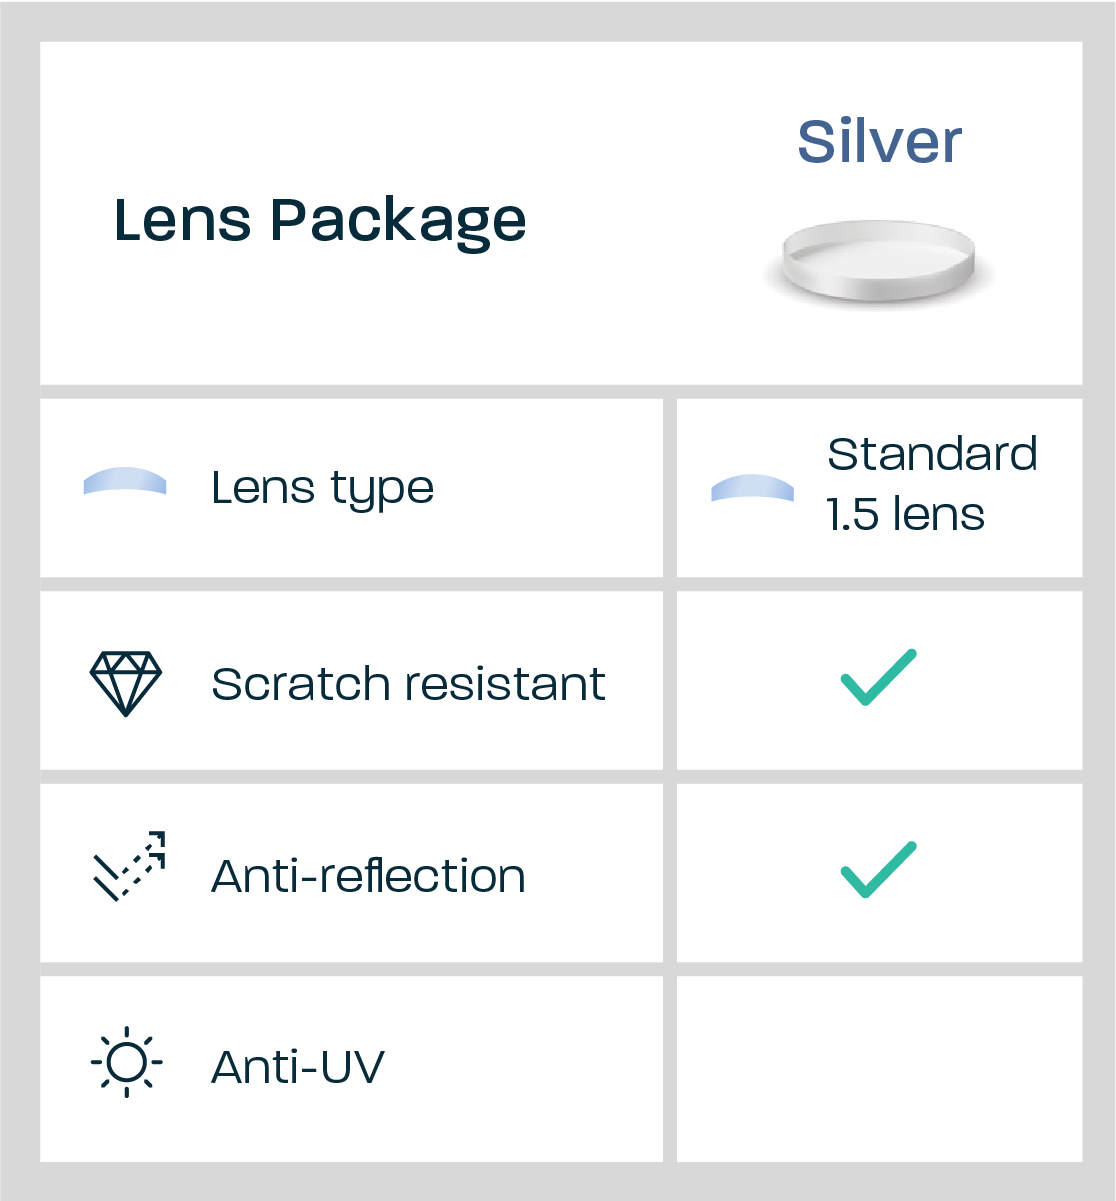 Silver Package features: standard lenses, scratch-resistant, anti-reflection coating